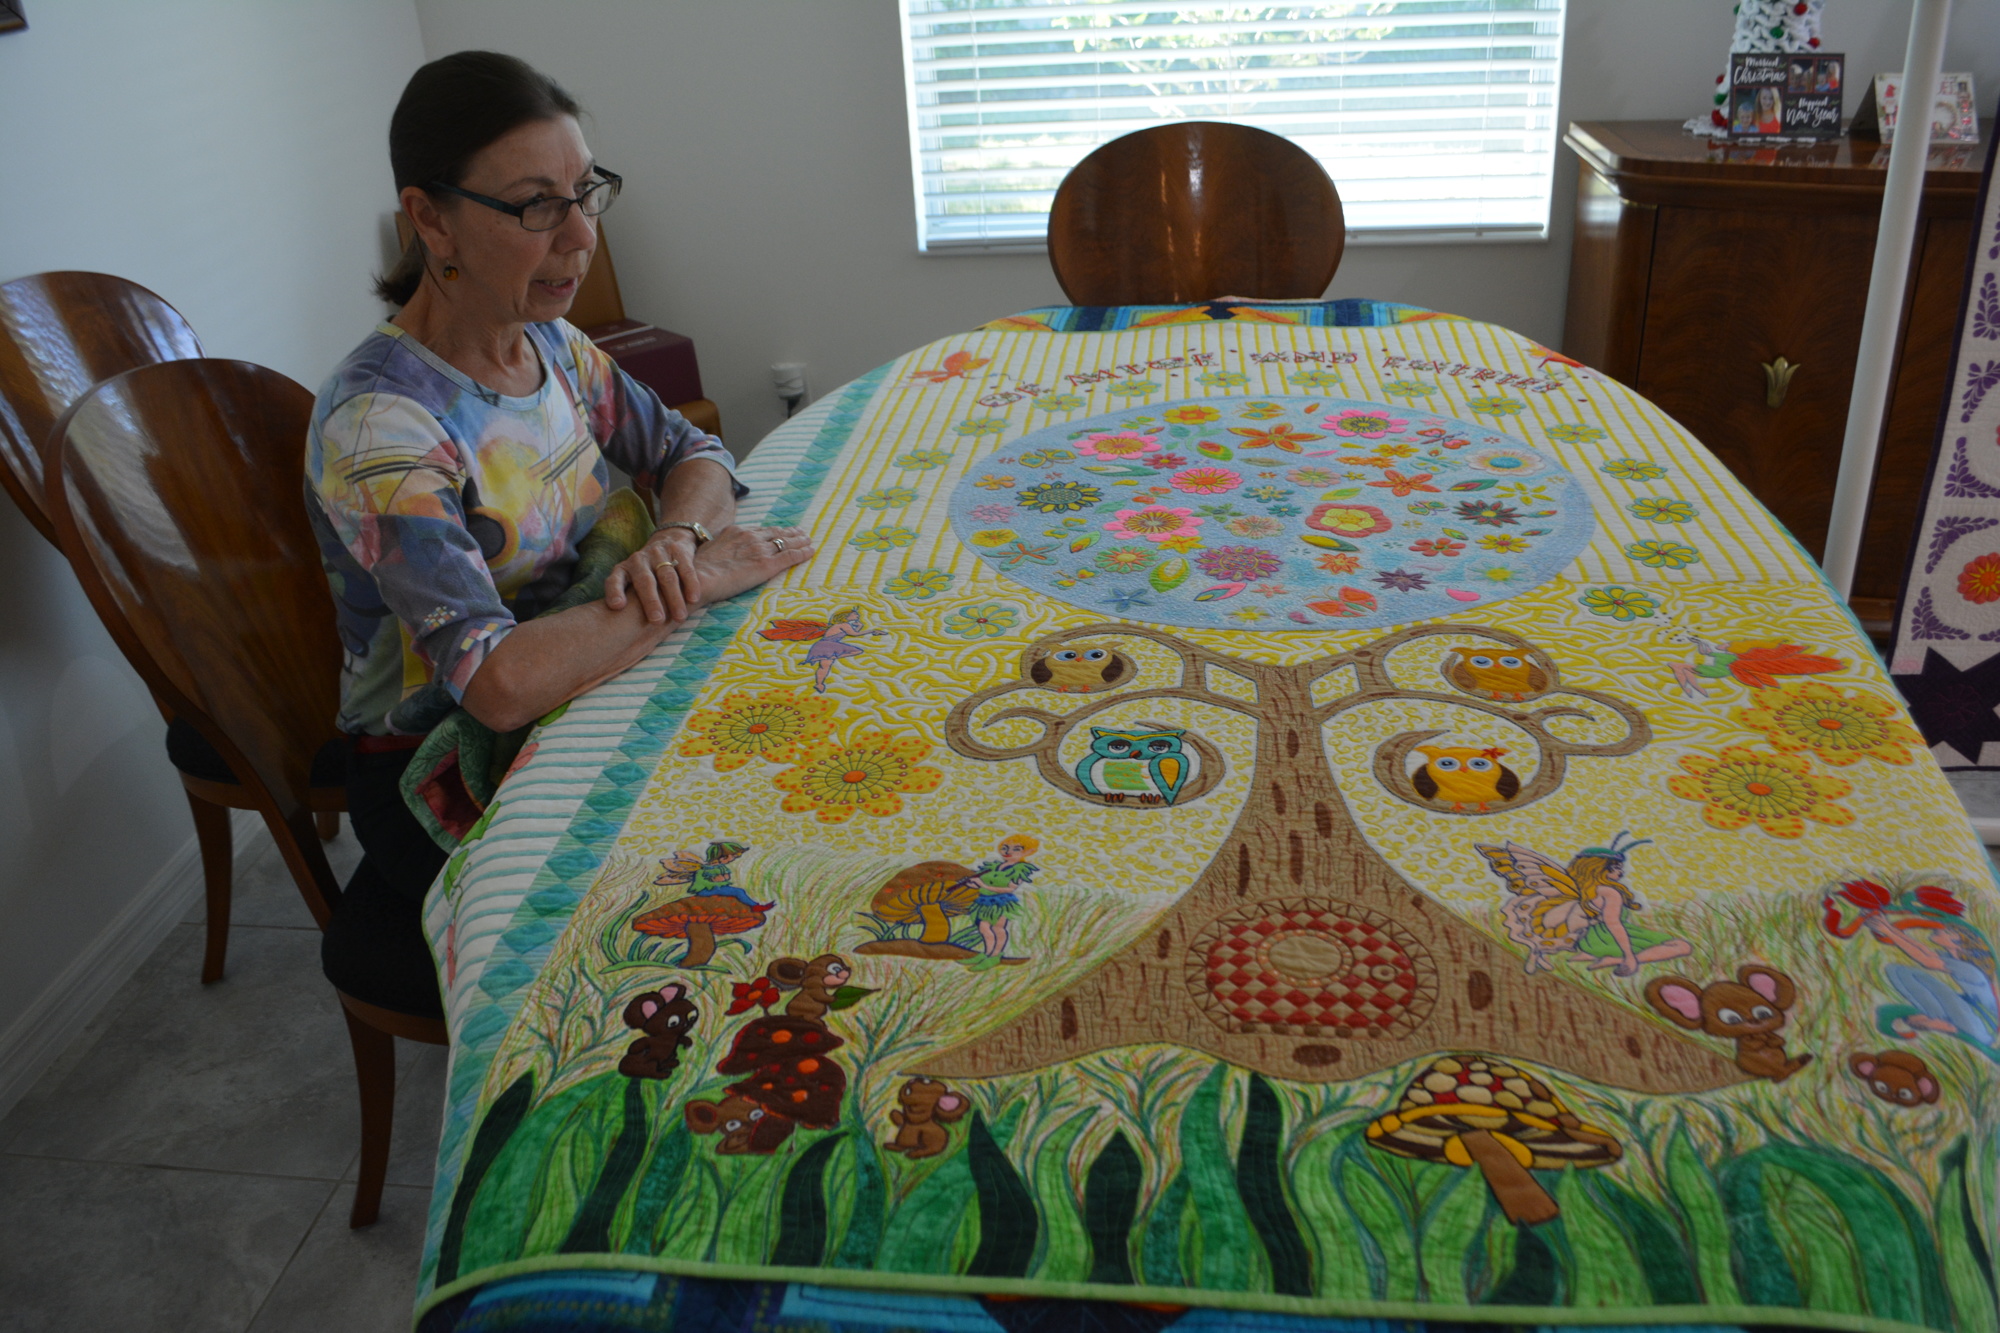 Evelyn Townsend said has made about 70 quilts over the years.